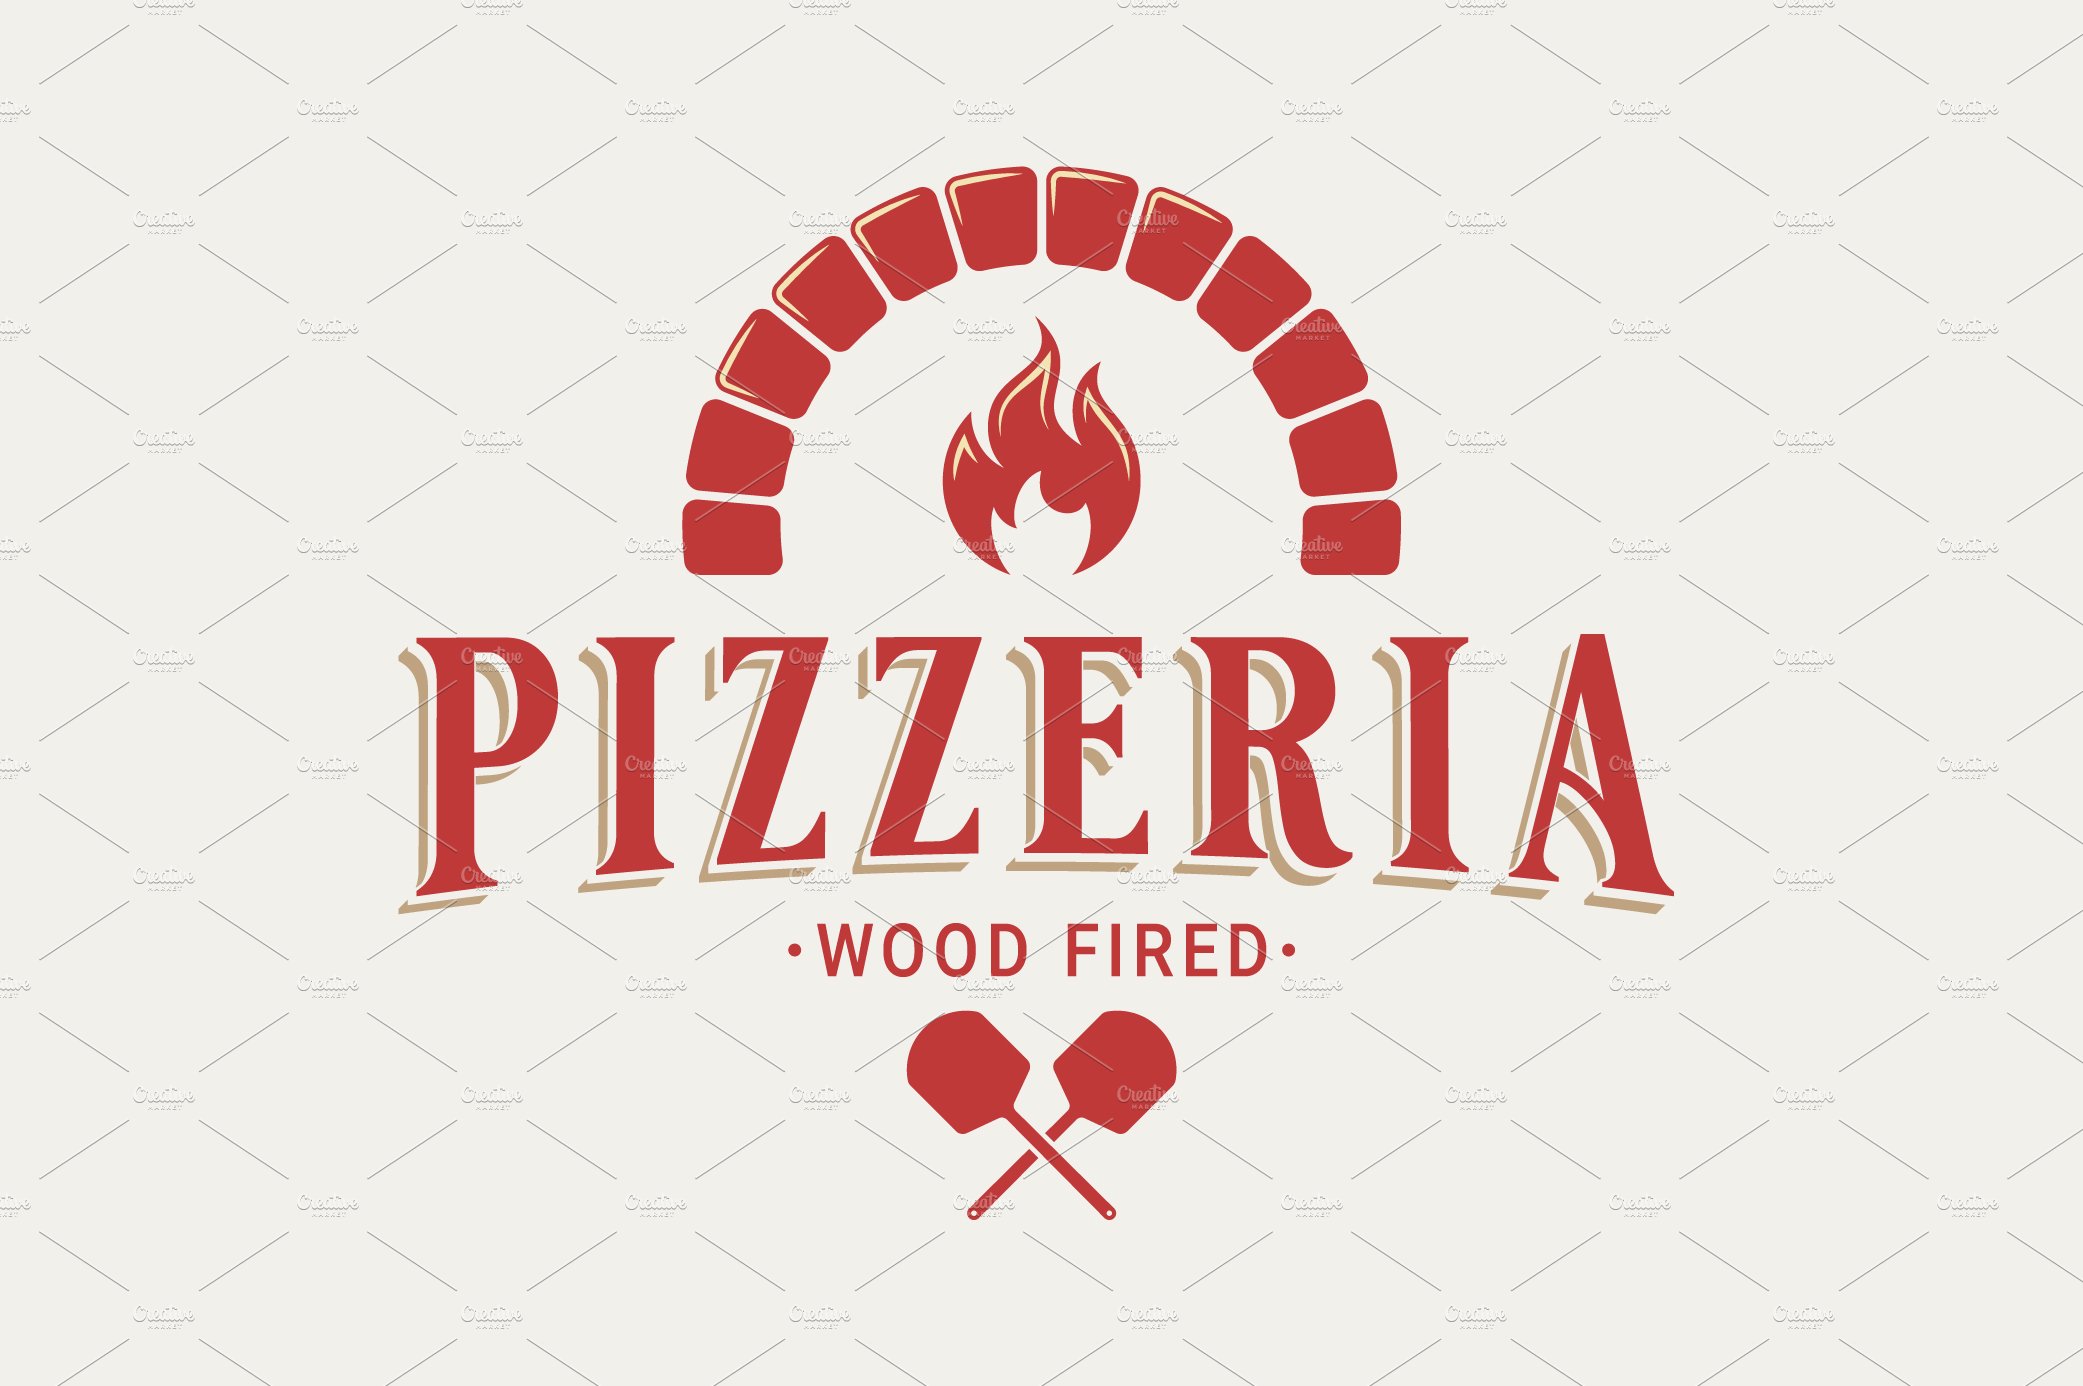 Pizzeria logo with oven shovel. cover image.